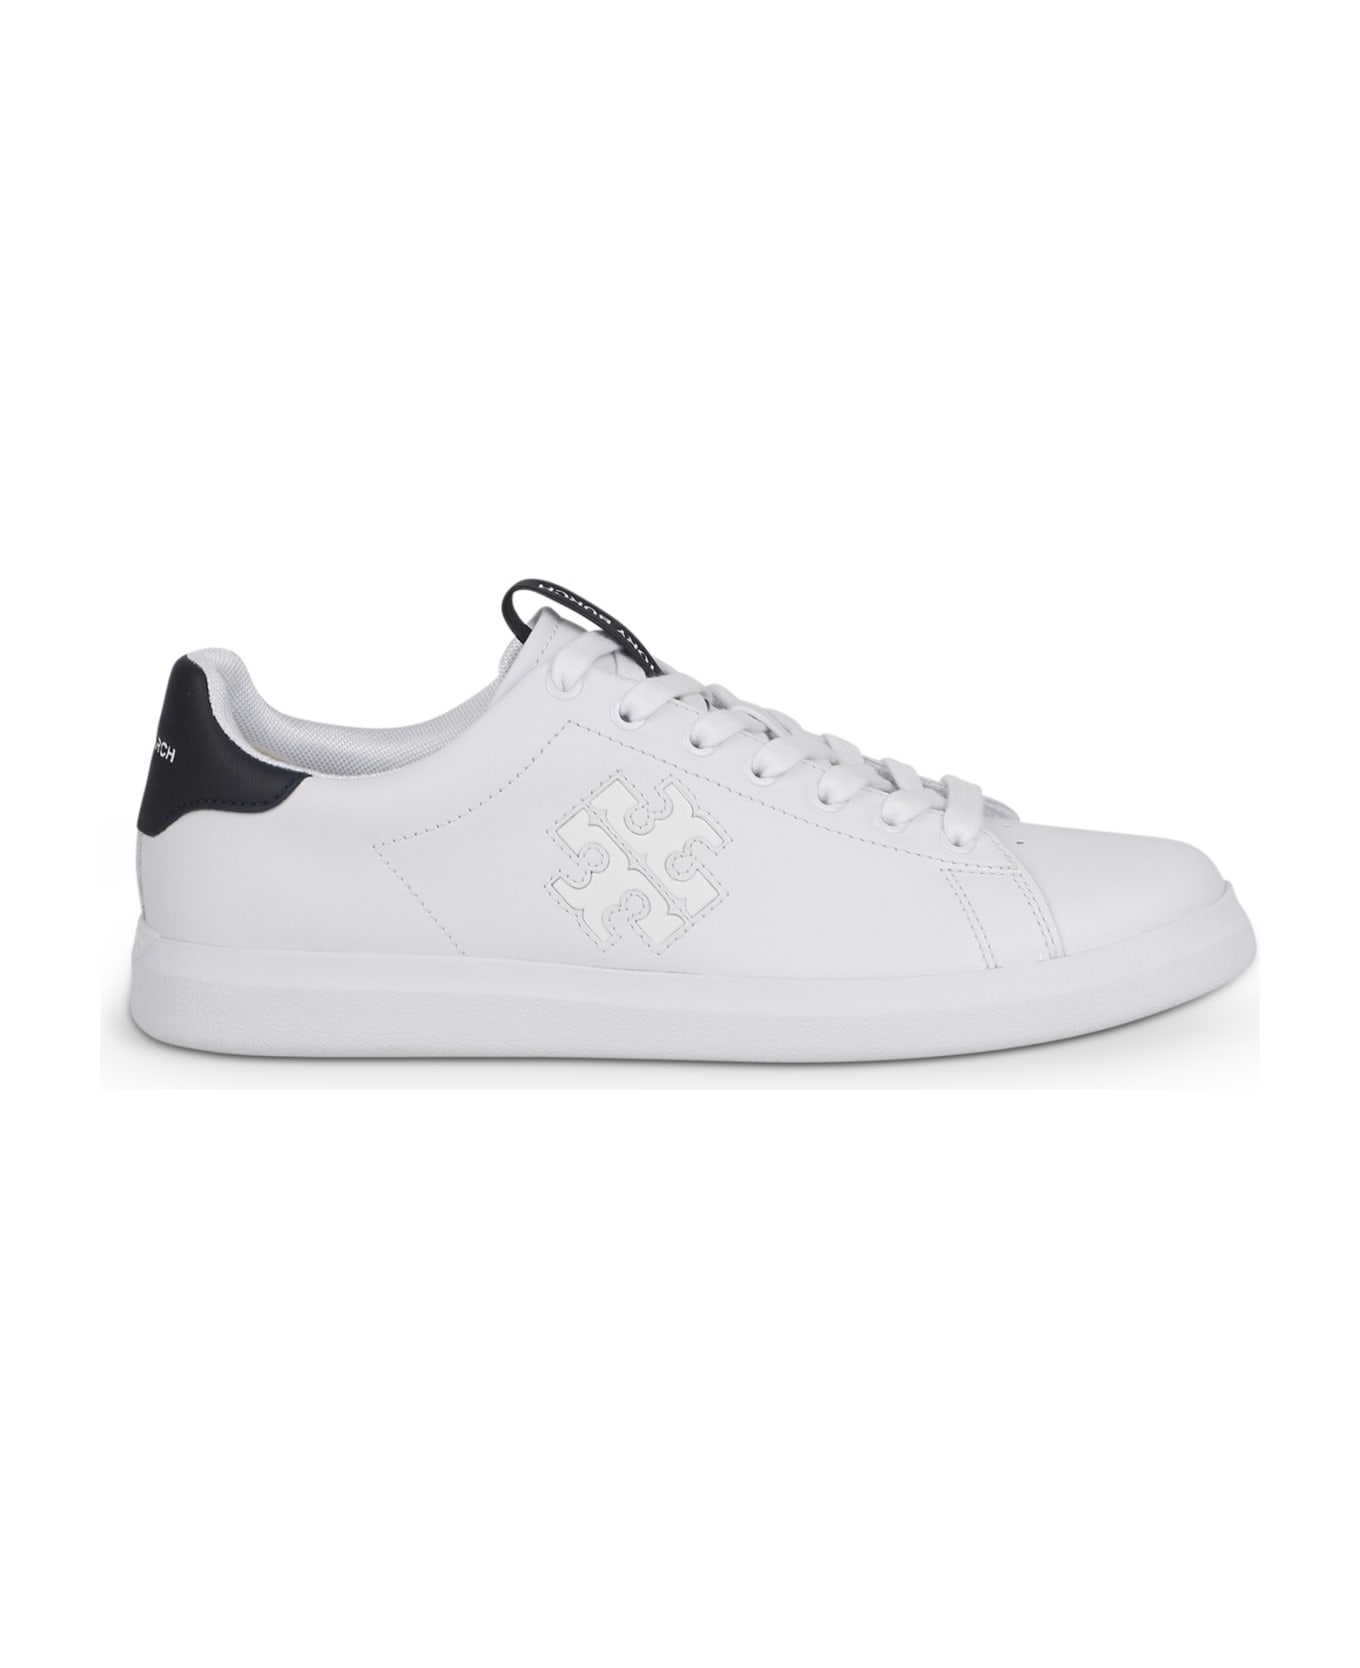 Tory Burch Double T Howell Sneakers